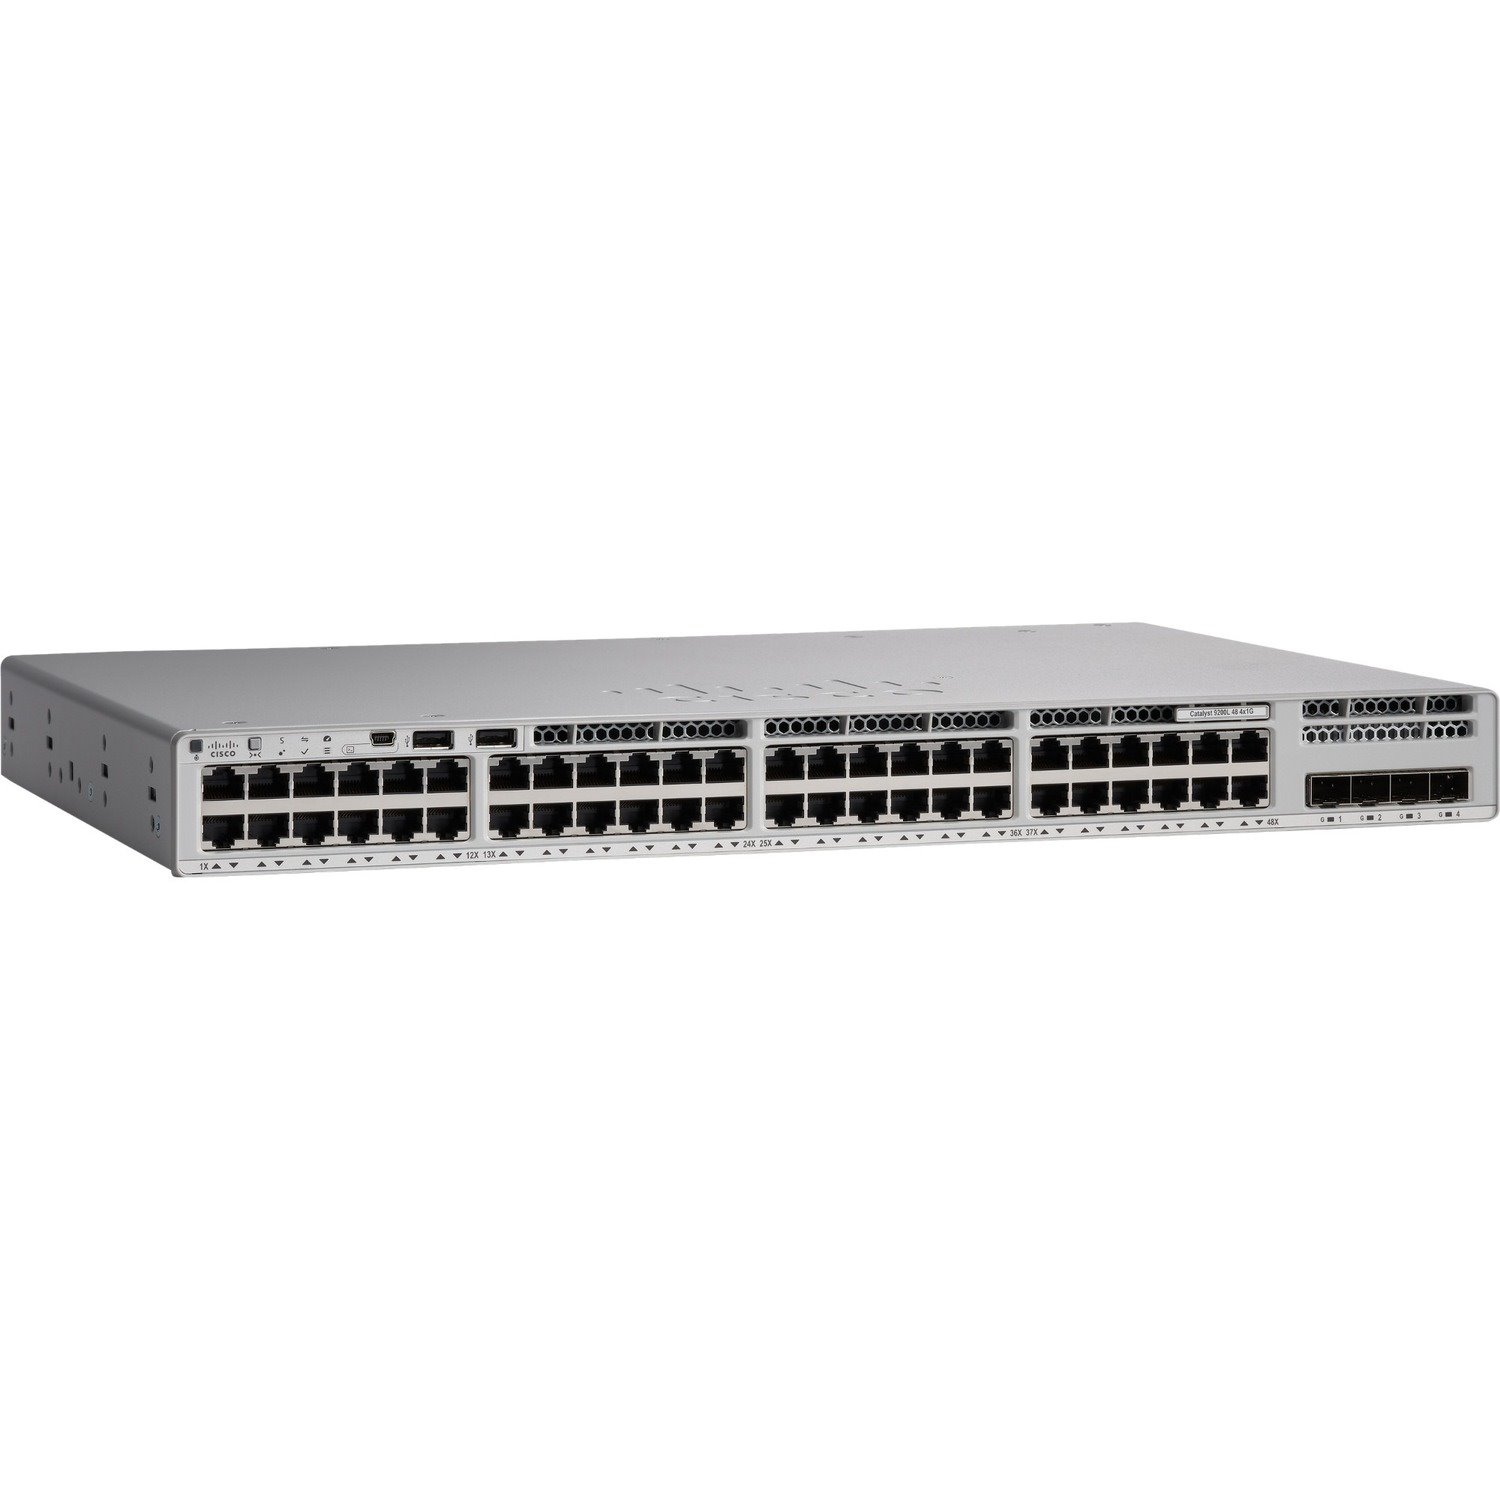 Cisco Catalyst 9200 C9200L-48T-4G 48 Ports Manageable Ethernet Switch - Refurbished